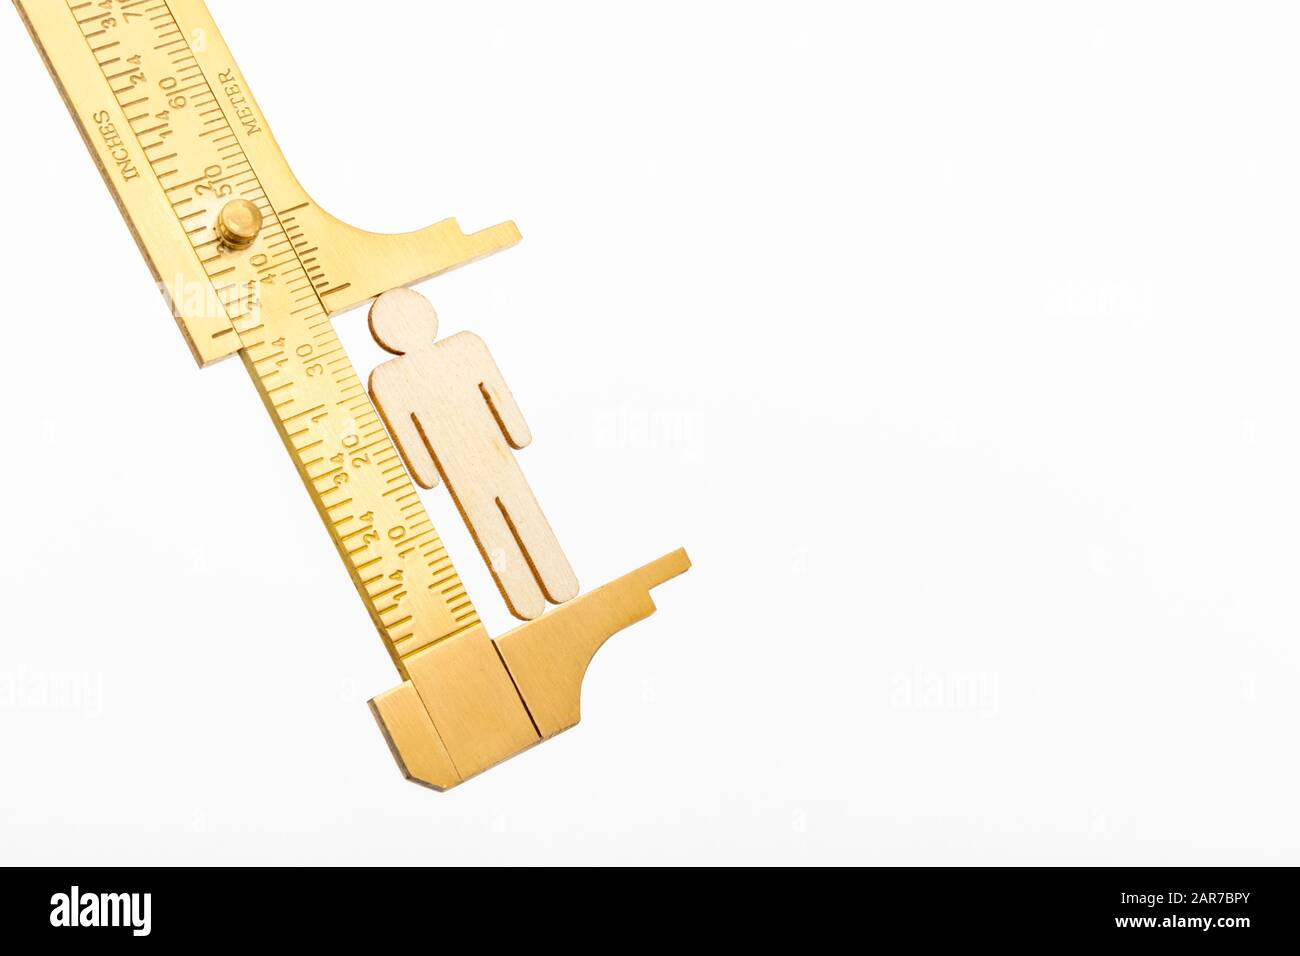 Macro small laser-cut wooden figure & brass calipers against off-white BG. Measuring personal performance indicators, demographics, productivity, Stock Photo